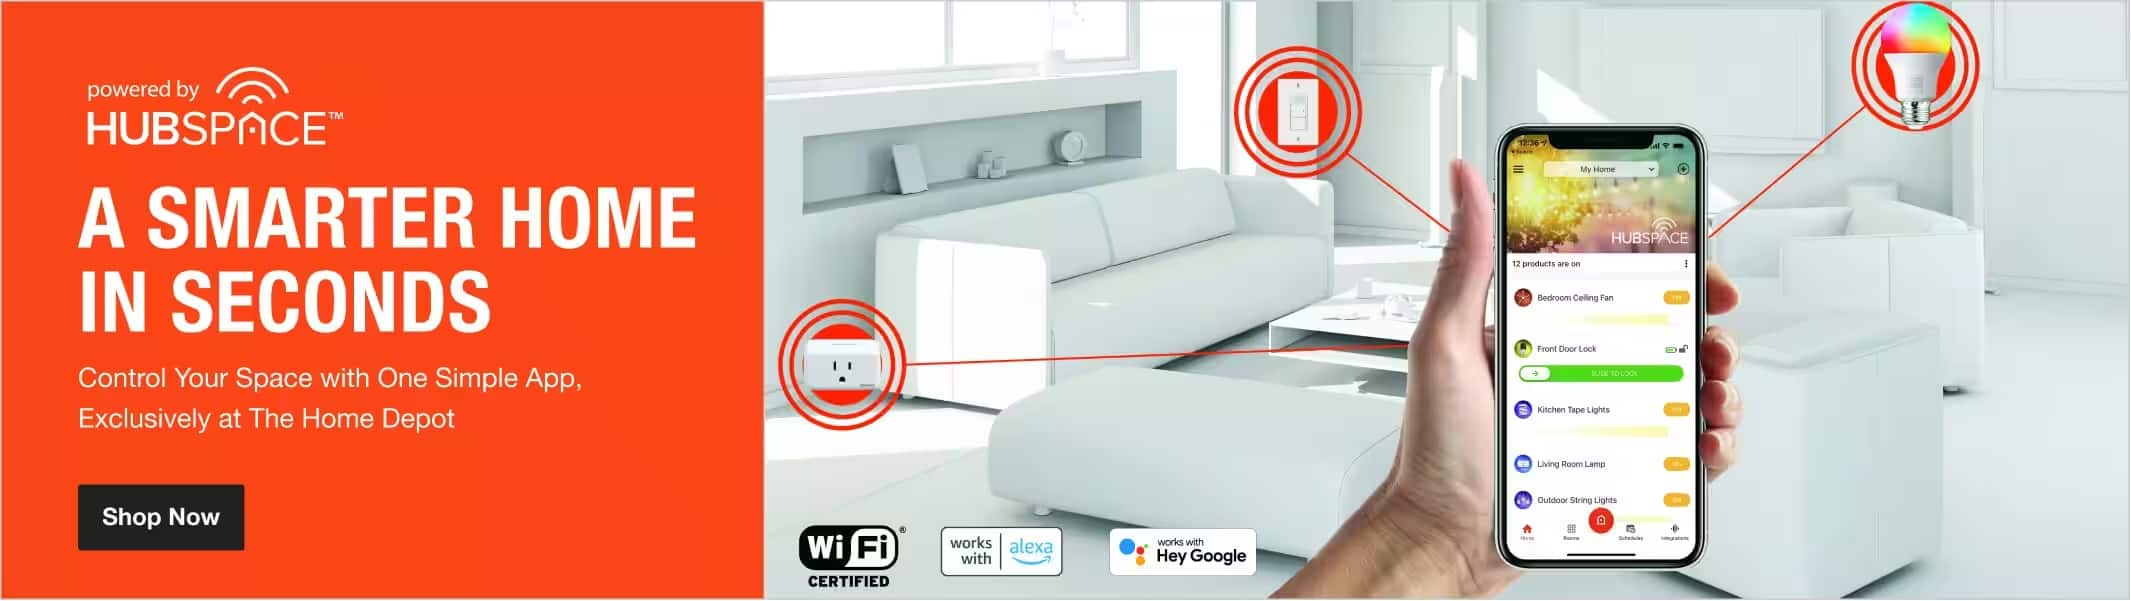 A Smarter Home in Seconds. Control Your Space with One Simple App. Exclusively at The Home Depot. Shop Now